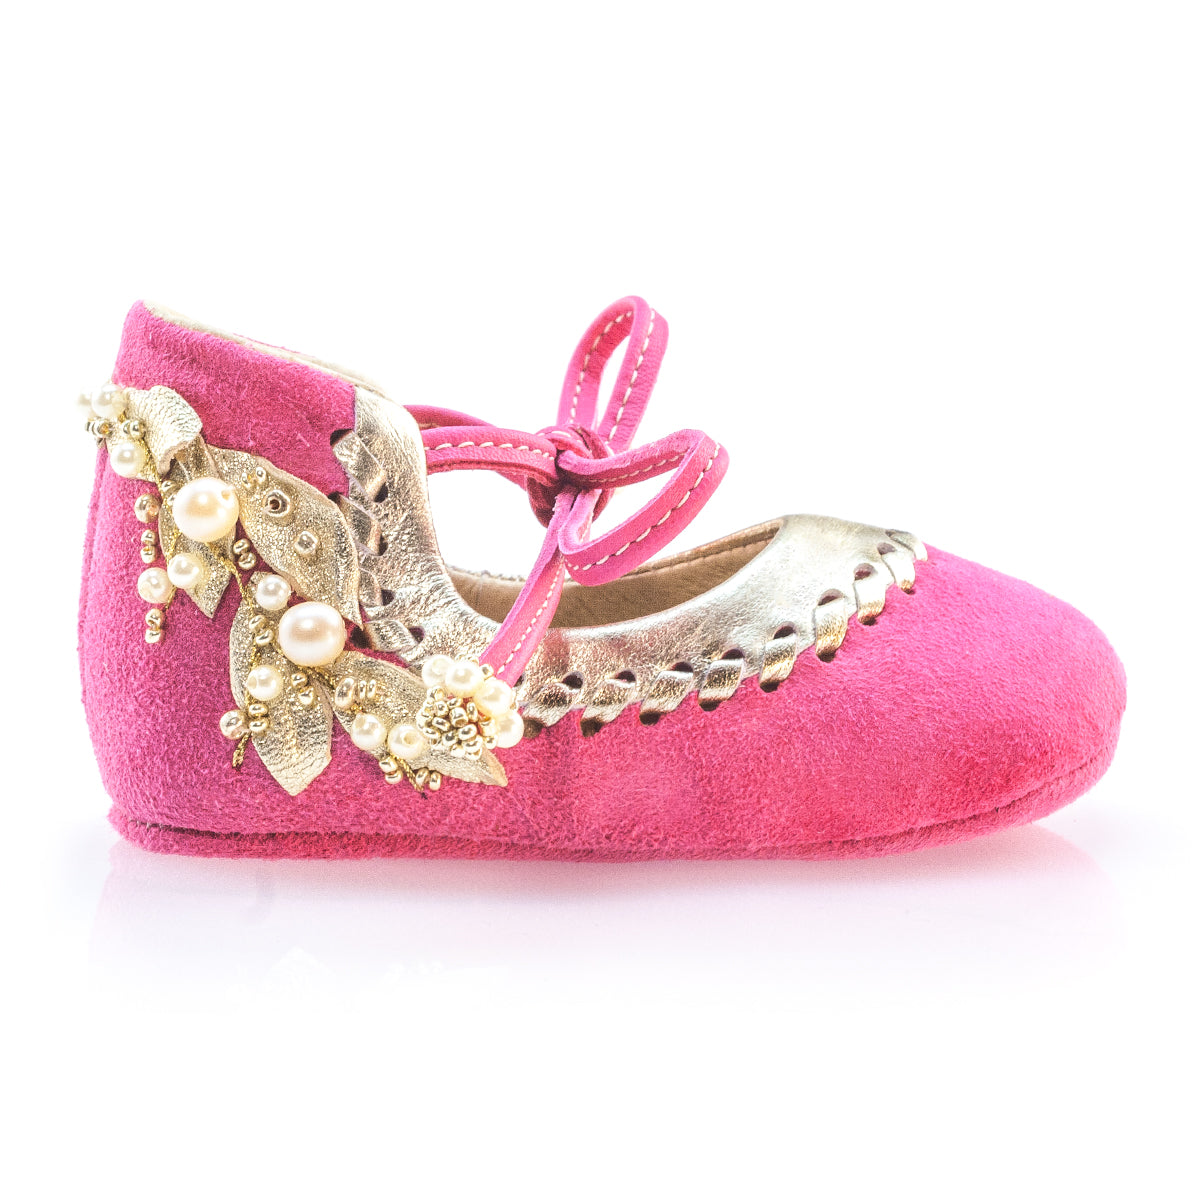 Vibys-Baby-Shoes-Camellia-side-view